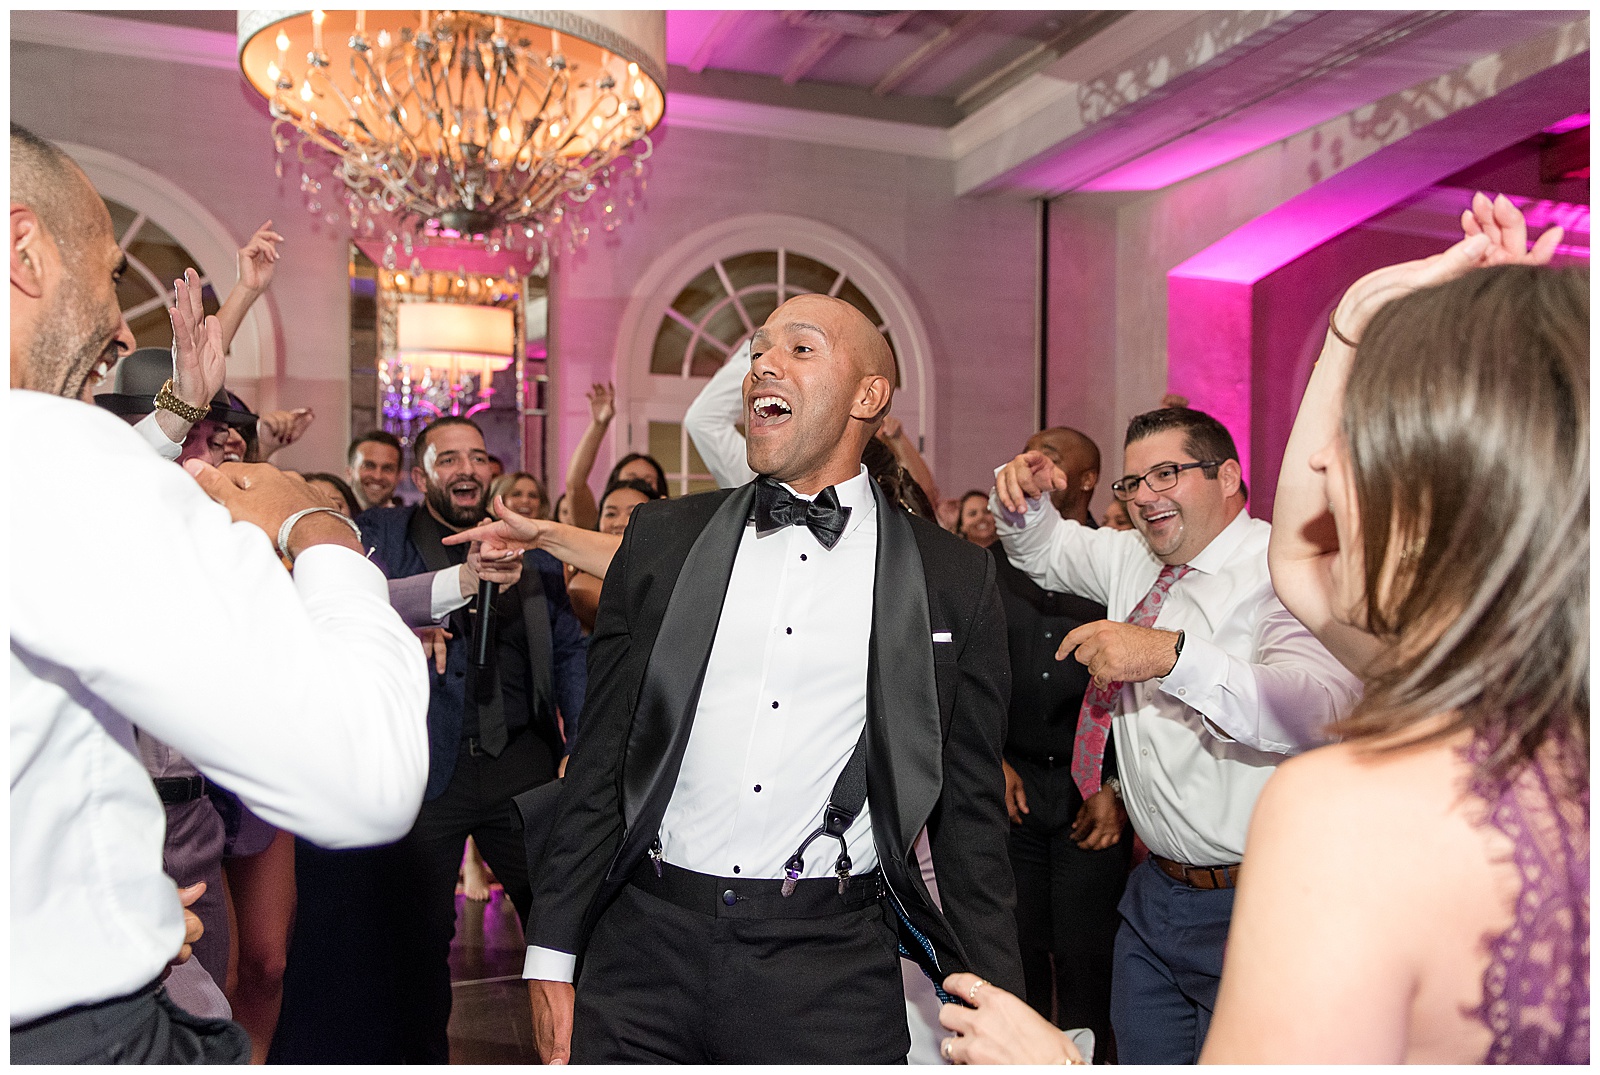 groom dancing and smiling during wedding reception surrounded by guests with large chandelier and pink lighting in the background